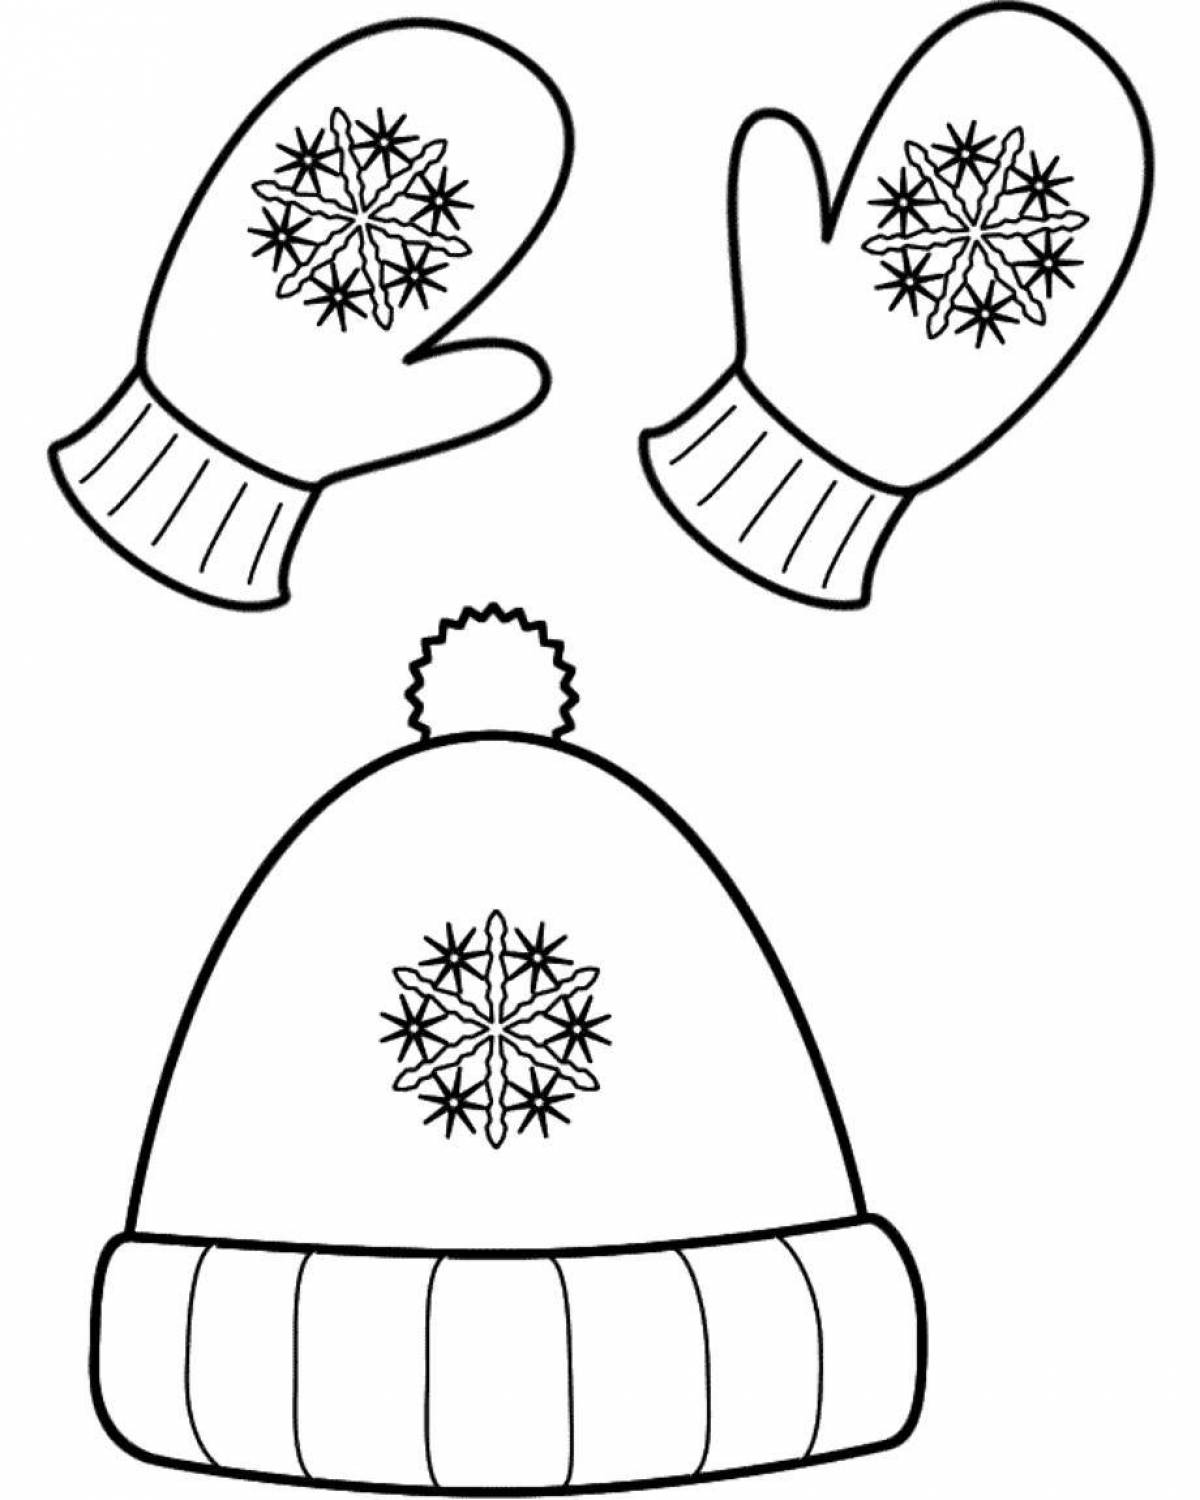 Showy mittens and hat coloring book for kids